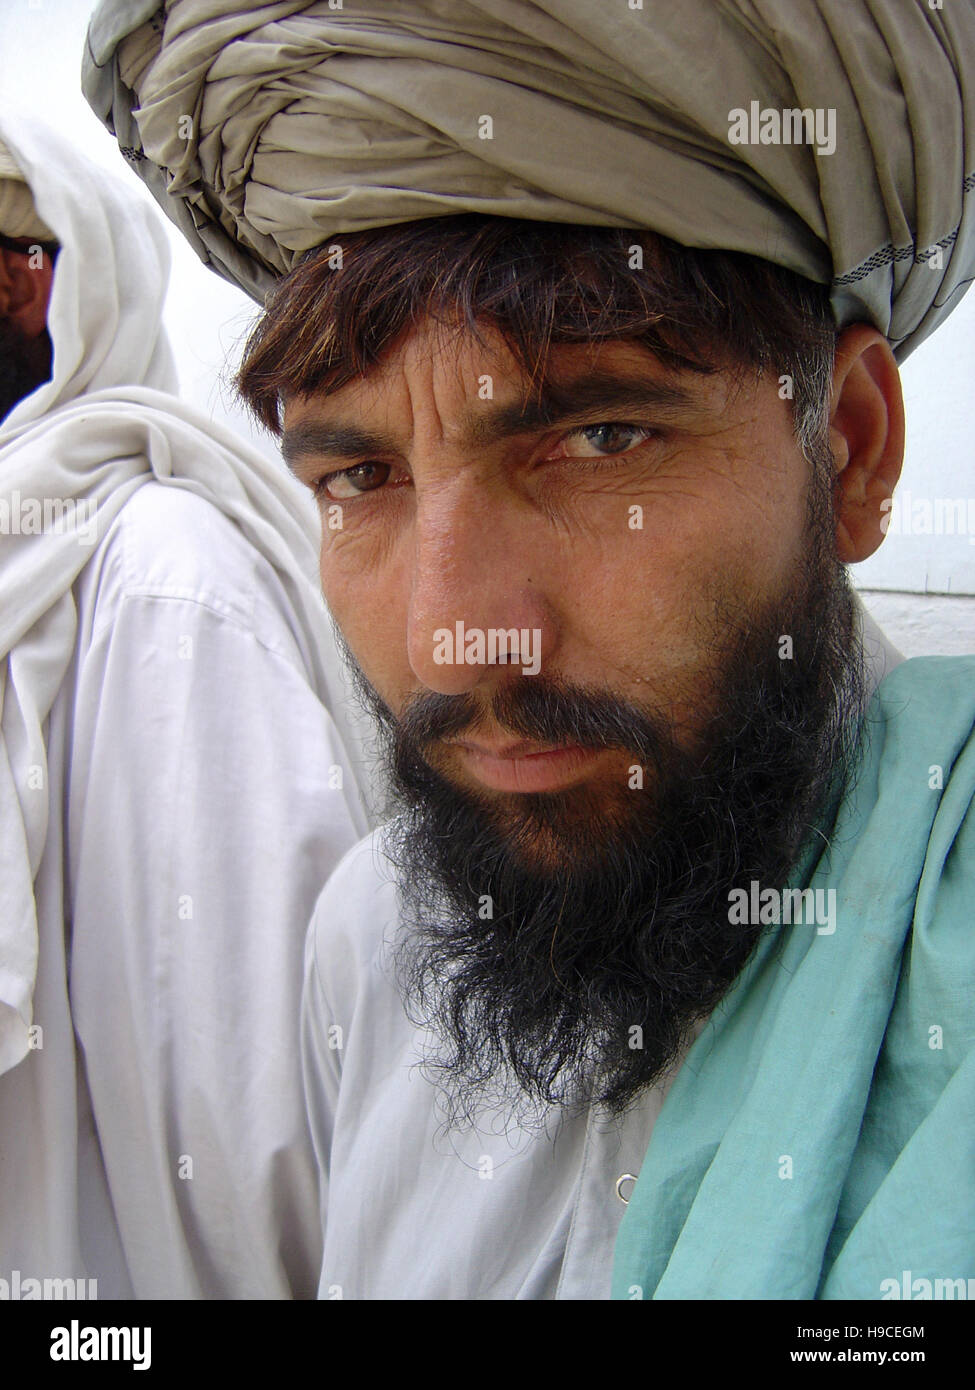 31st May 2004 Portrait of a man wearing a lungee (turban) inside the Wazir Akbar Khan Orthopaedic Centre in northern Kabul, Afghanistan. Stock Photo